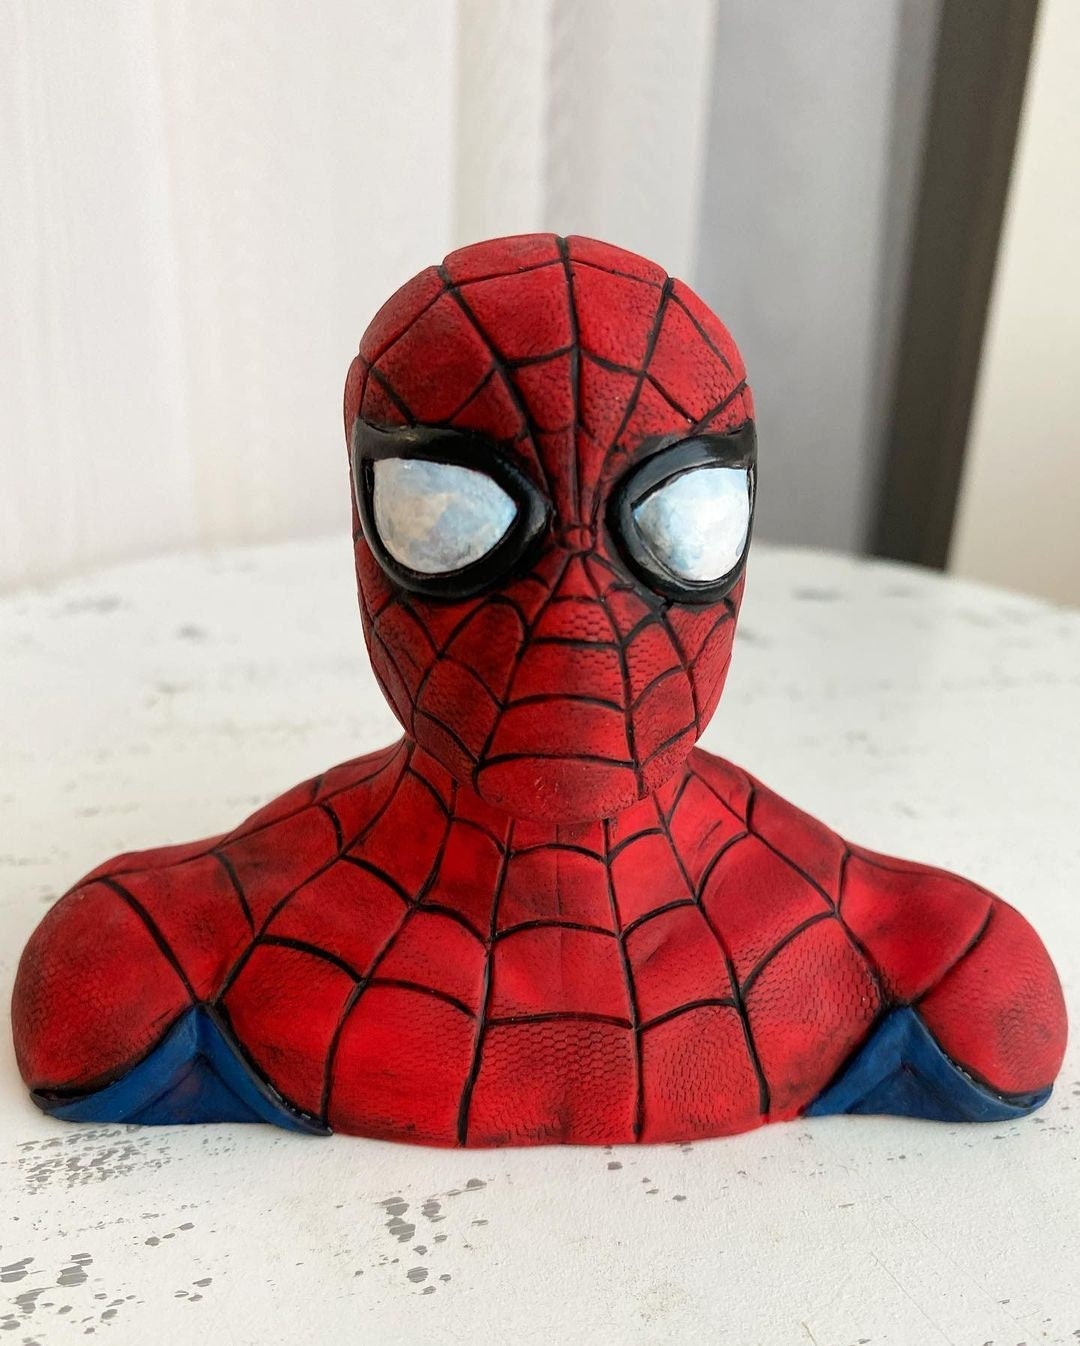 Dr. Squatch Soap Spidey Suds - Inspired by Spider-Man - Natural Soap for  Men, 3-Pack Natural Soap